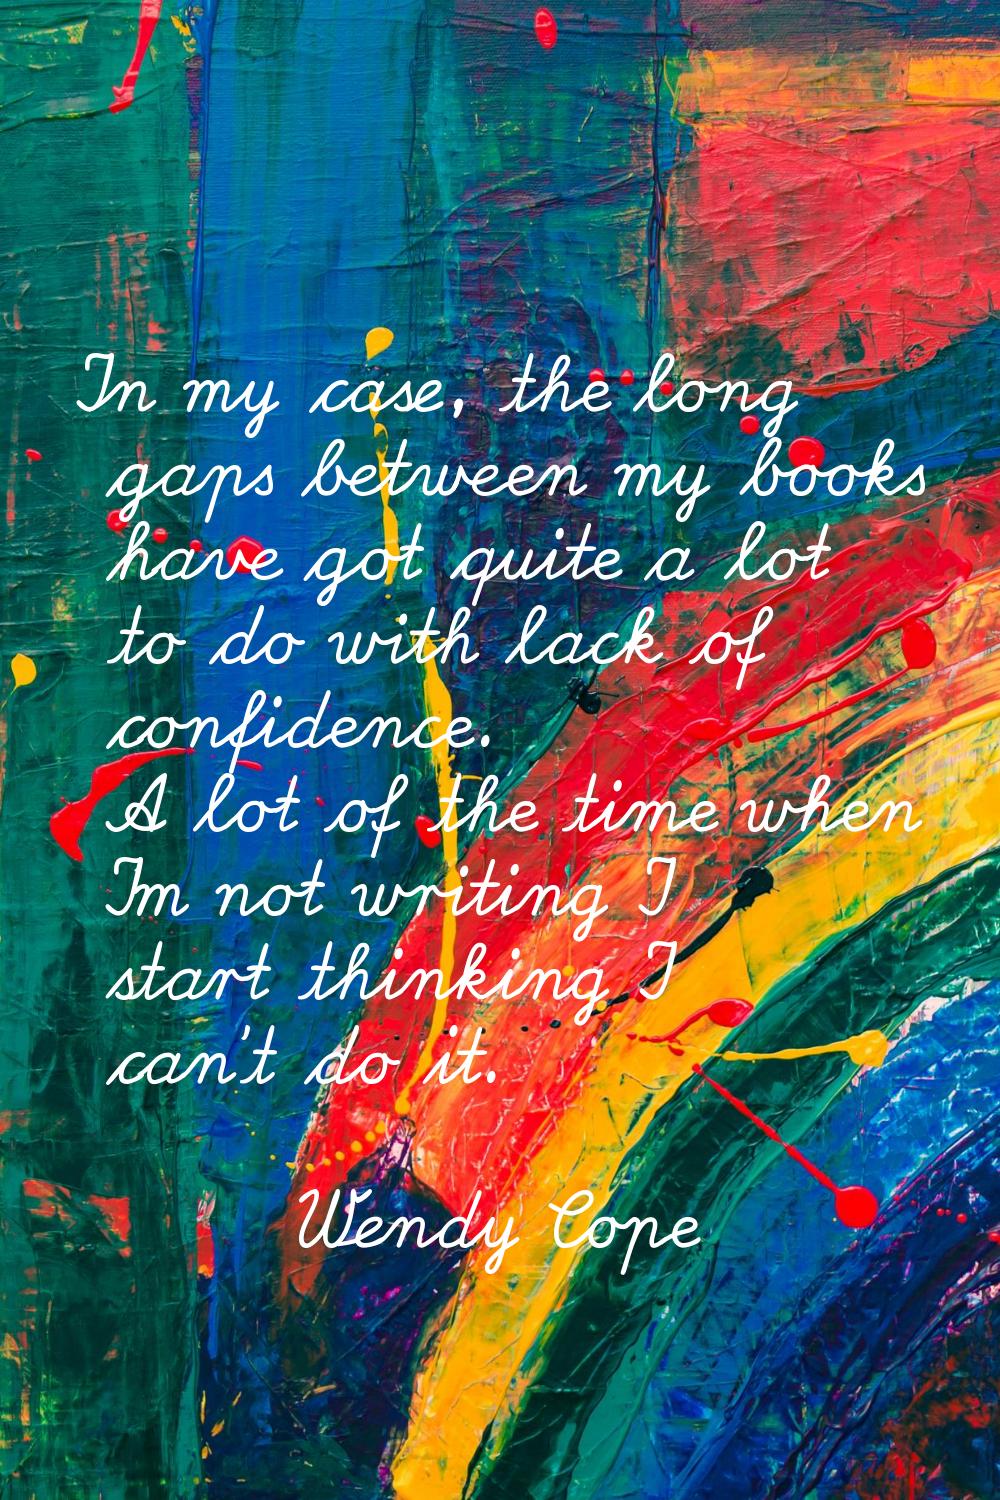 In my case, the long gaps between my books have got quite a lot to do with lack of confidence. A lo